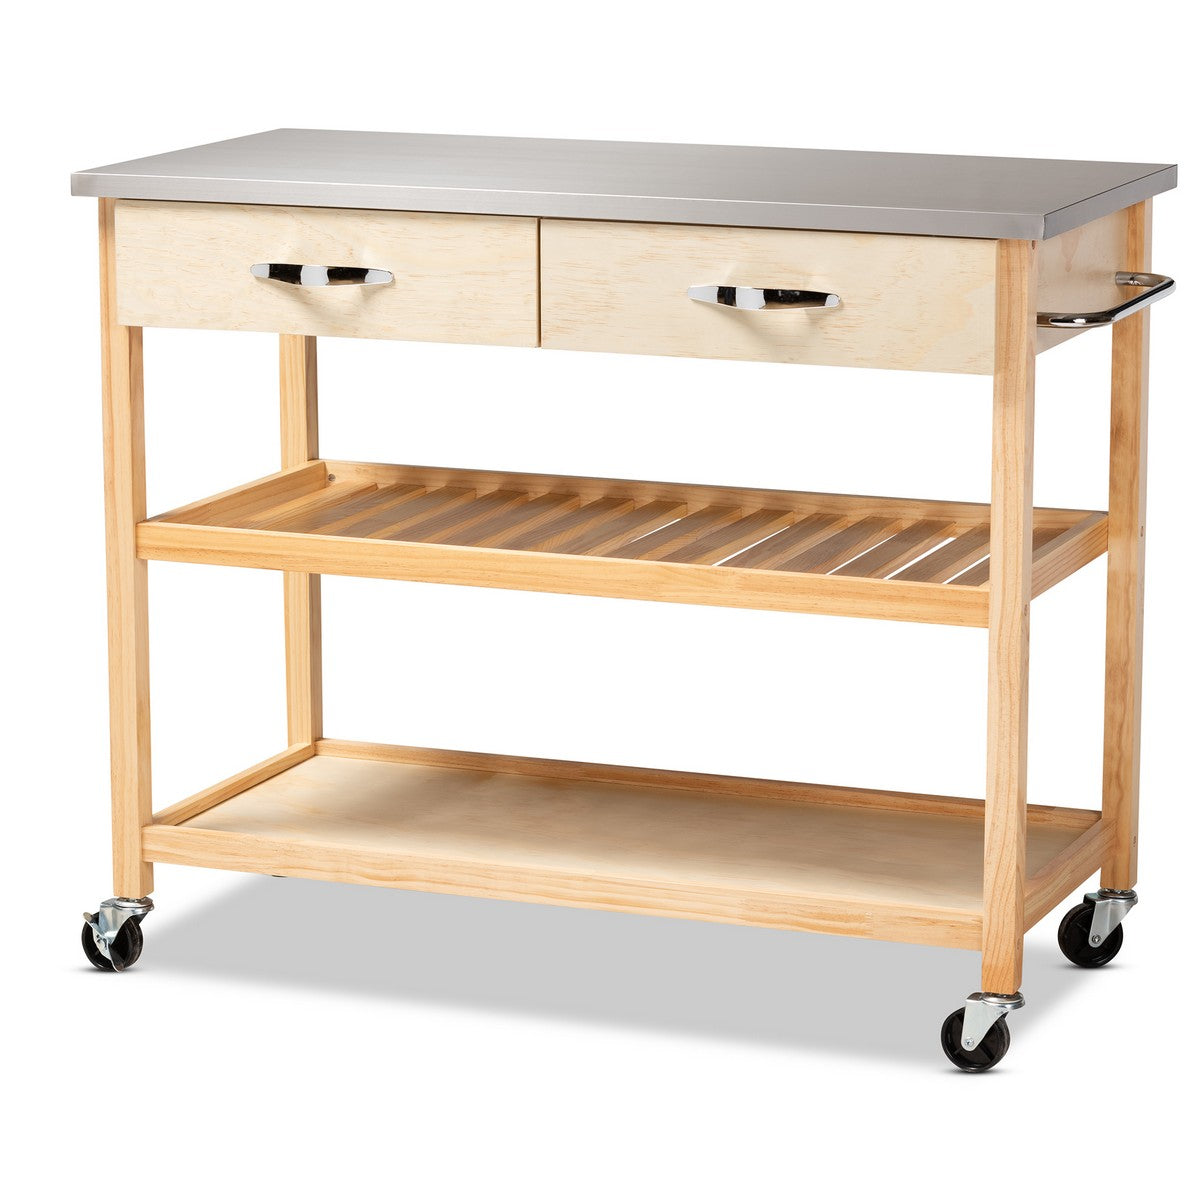 Baxton Studio Cresta Modern and Contemporary Pine Wood and Stainless Steel 2-Drawer Kitchen Island Utility Storage Cart Baxton Studio-Trolleys and Carts-Minimal And Modern - 1